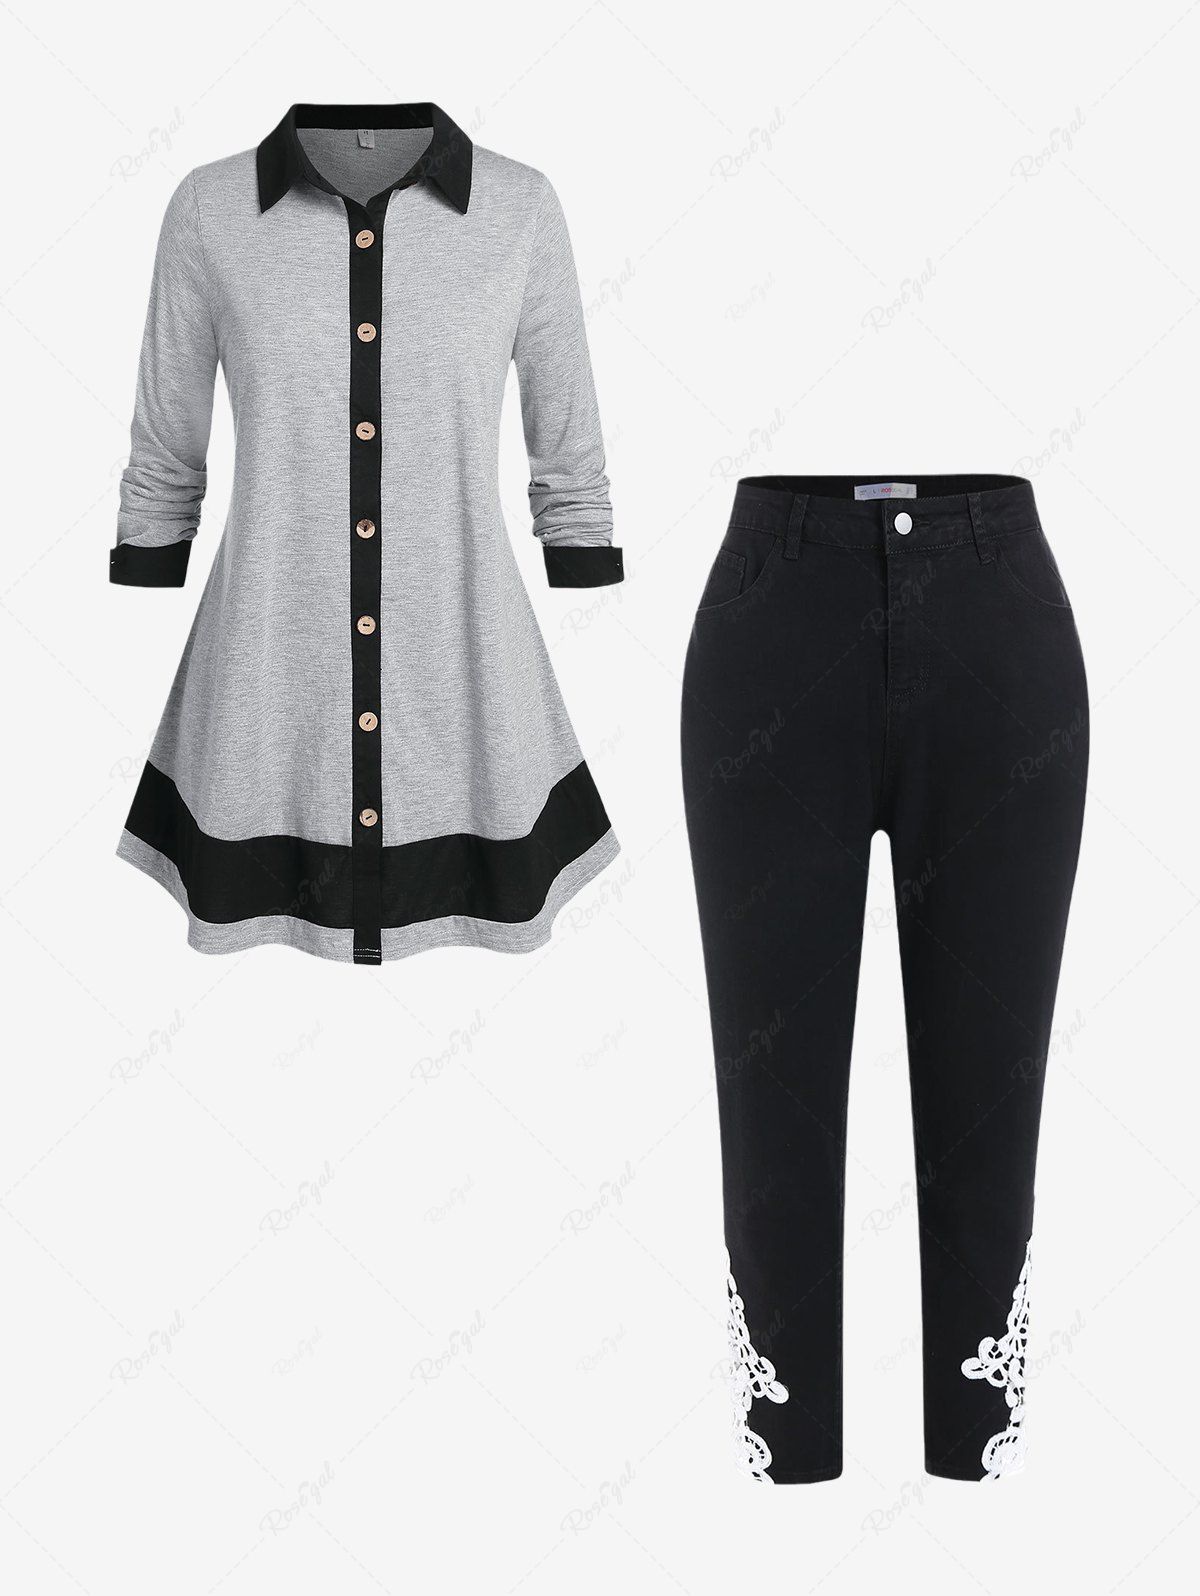 Discount Bicolor Button Up Tunic Shirt and Lace Guipure Jeans Plus Size Outfit  